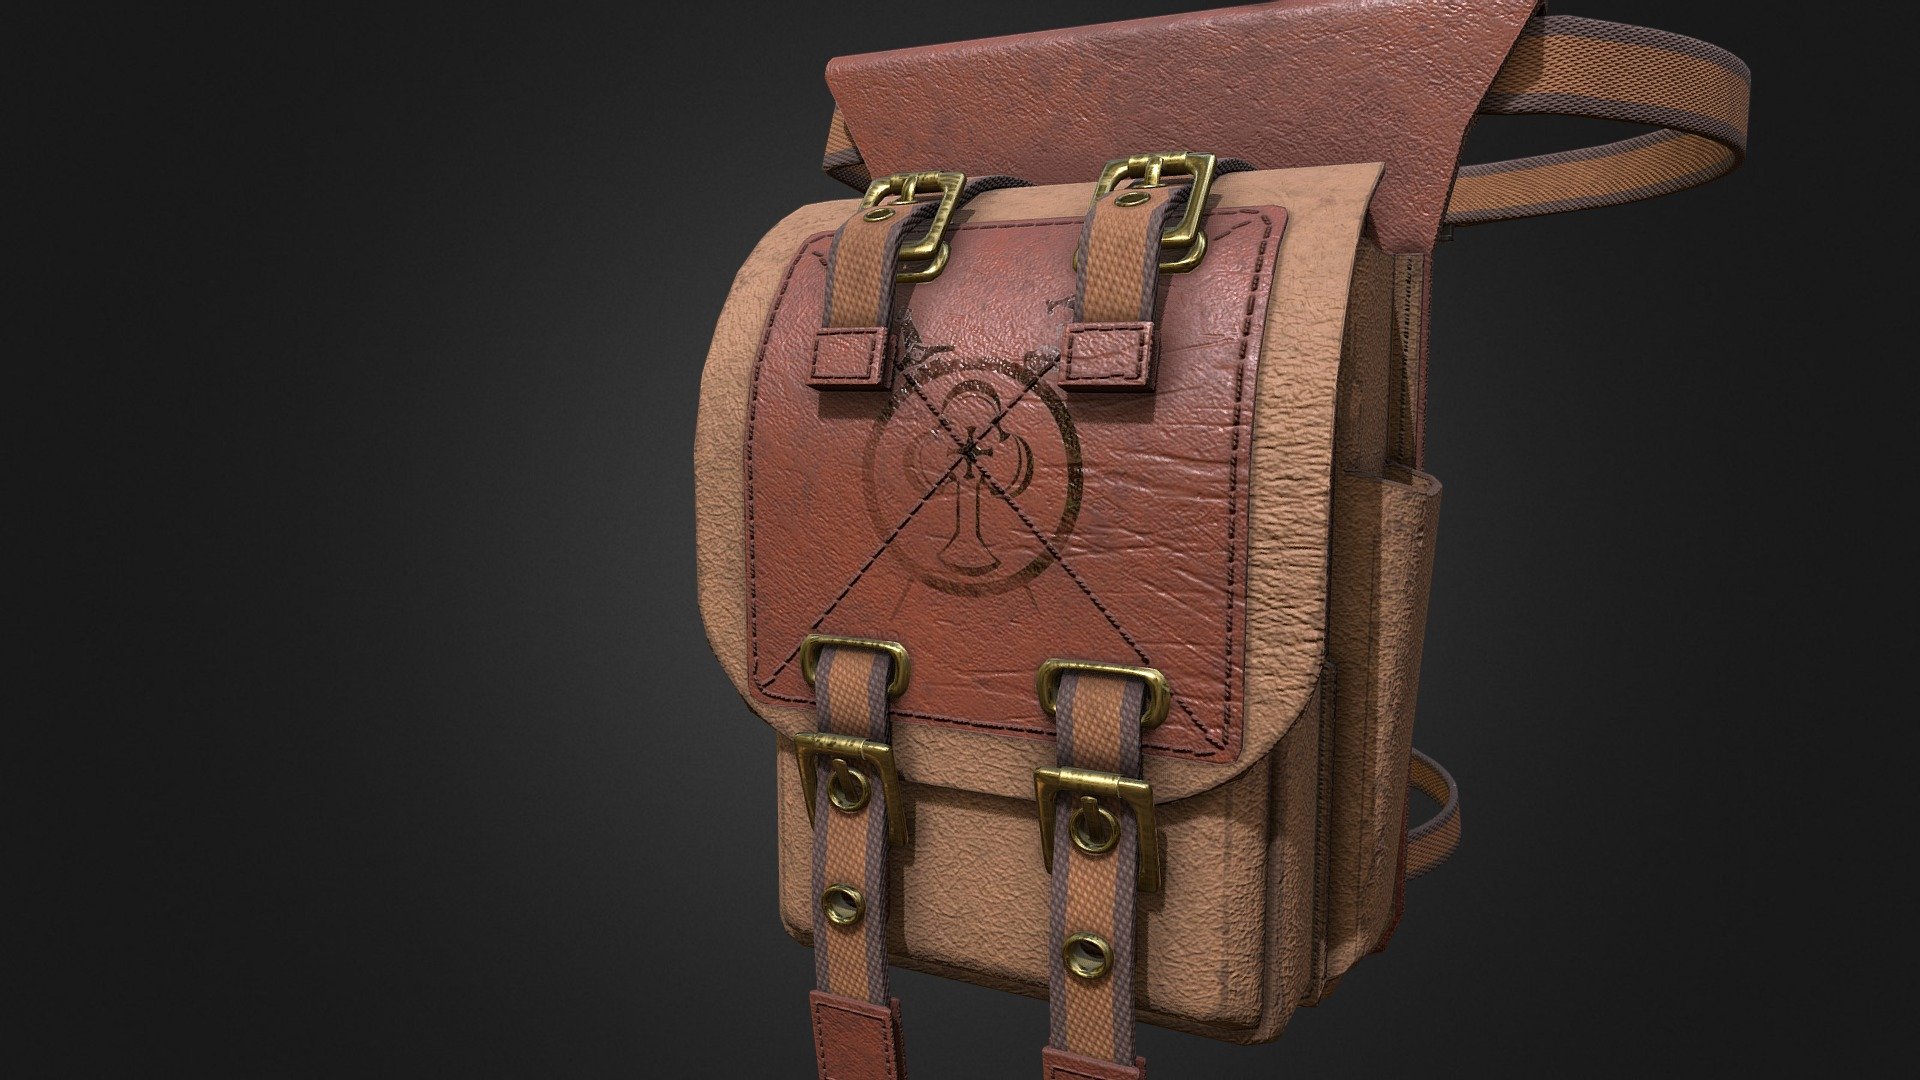 The High resolution for the drop waist leg bag.

All Textures complete 3d model